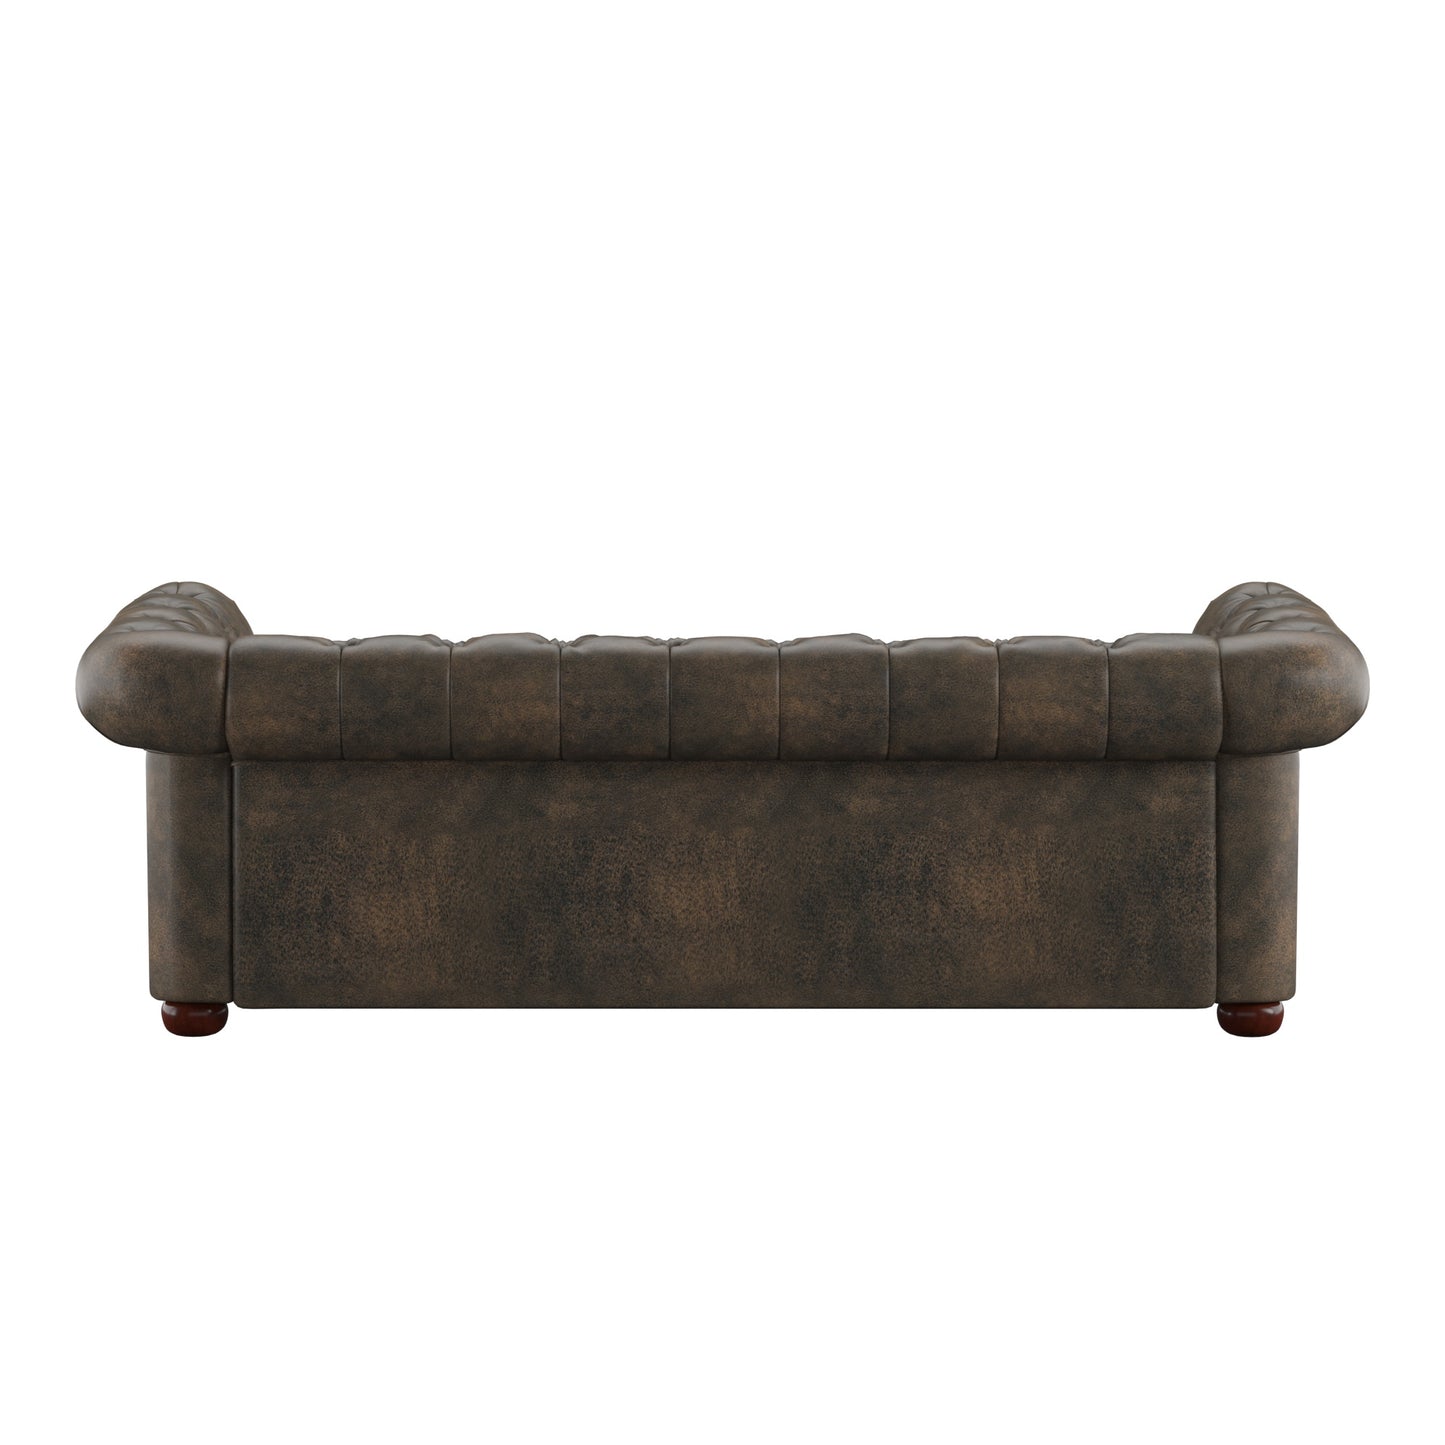 Tufted Scroll Arm Chesterfield Sofa - Brown Microfiber Upholstery